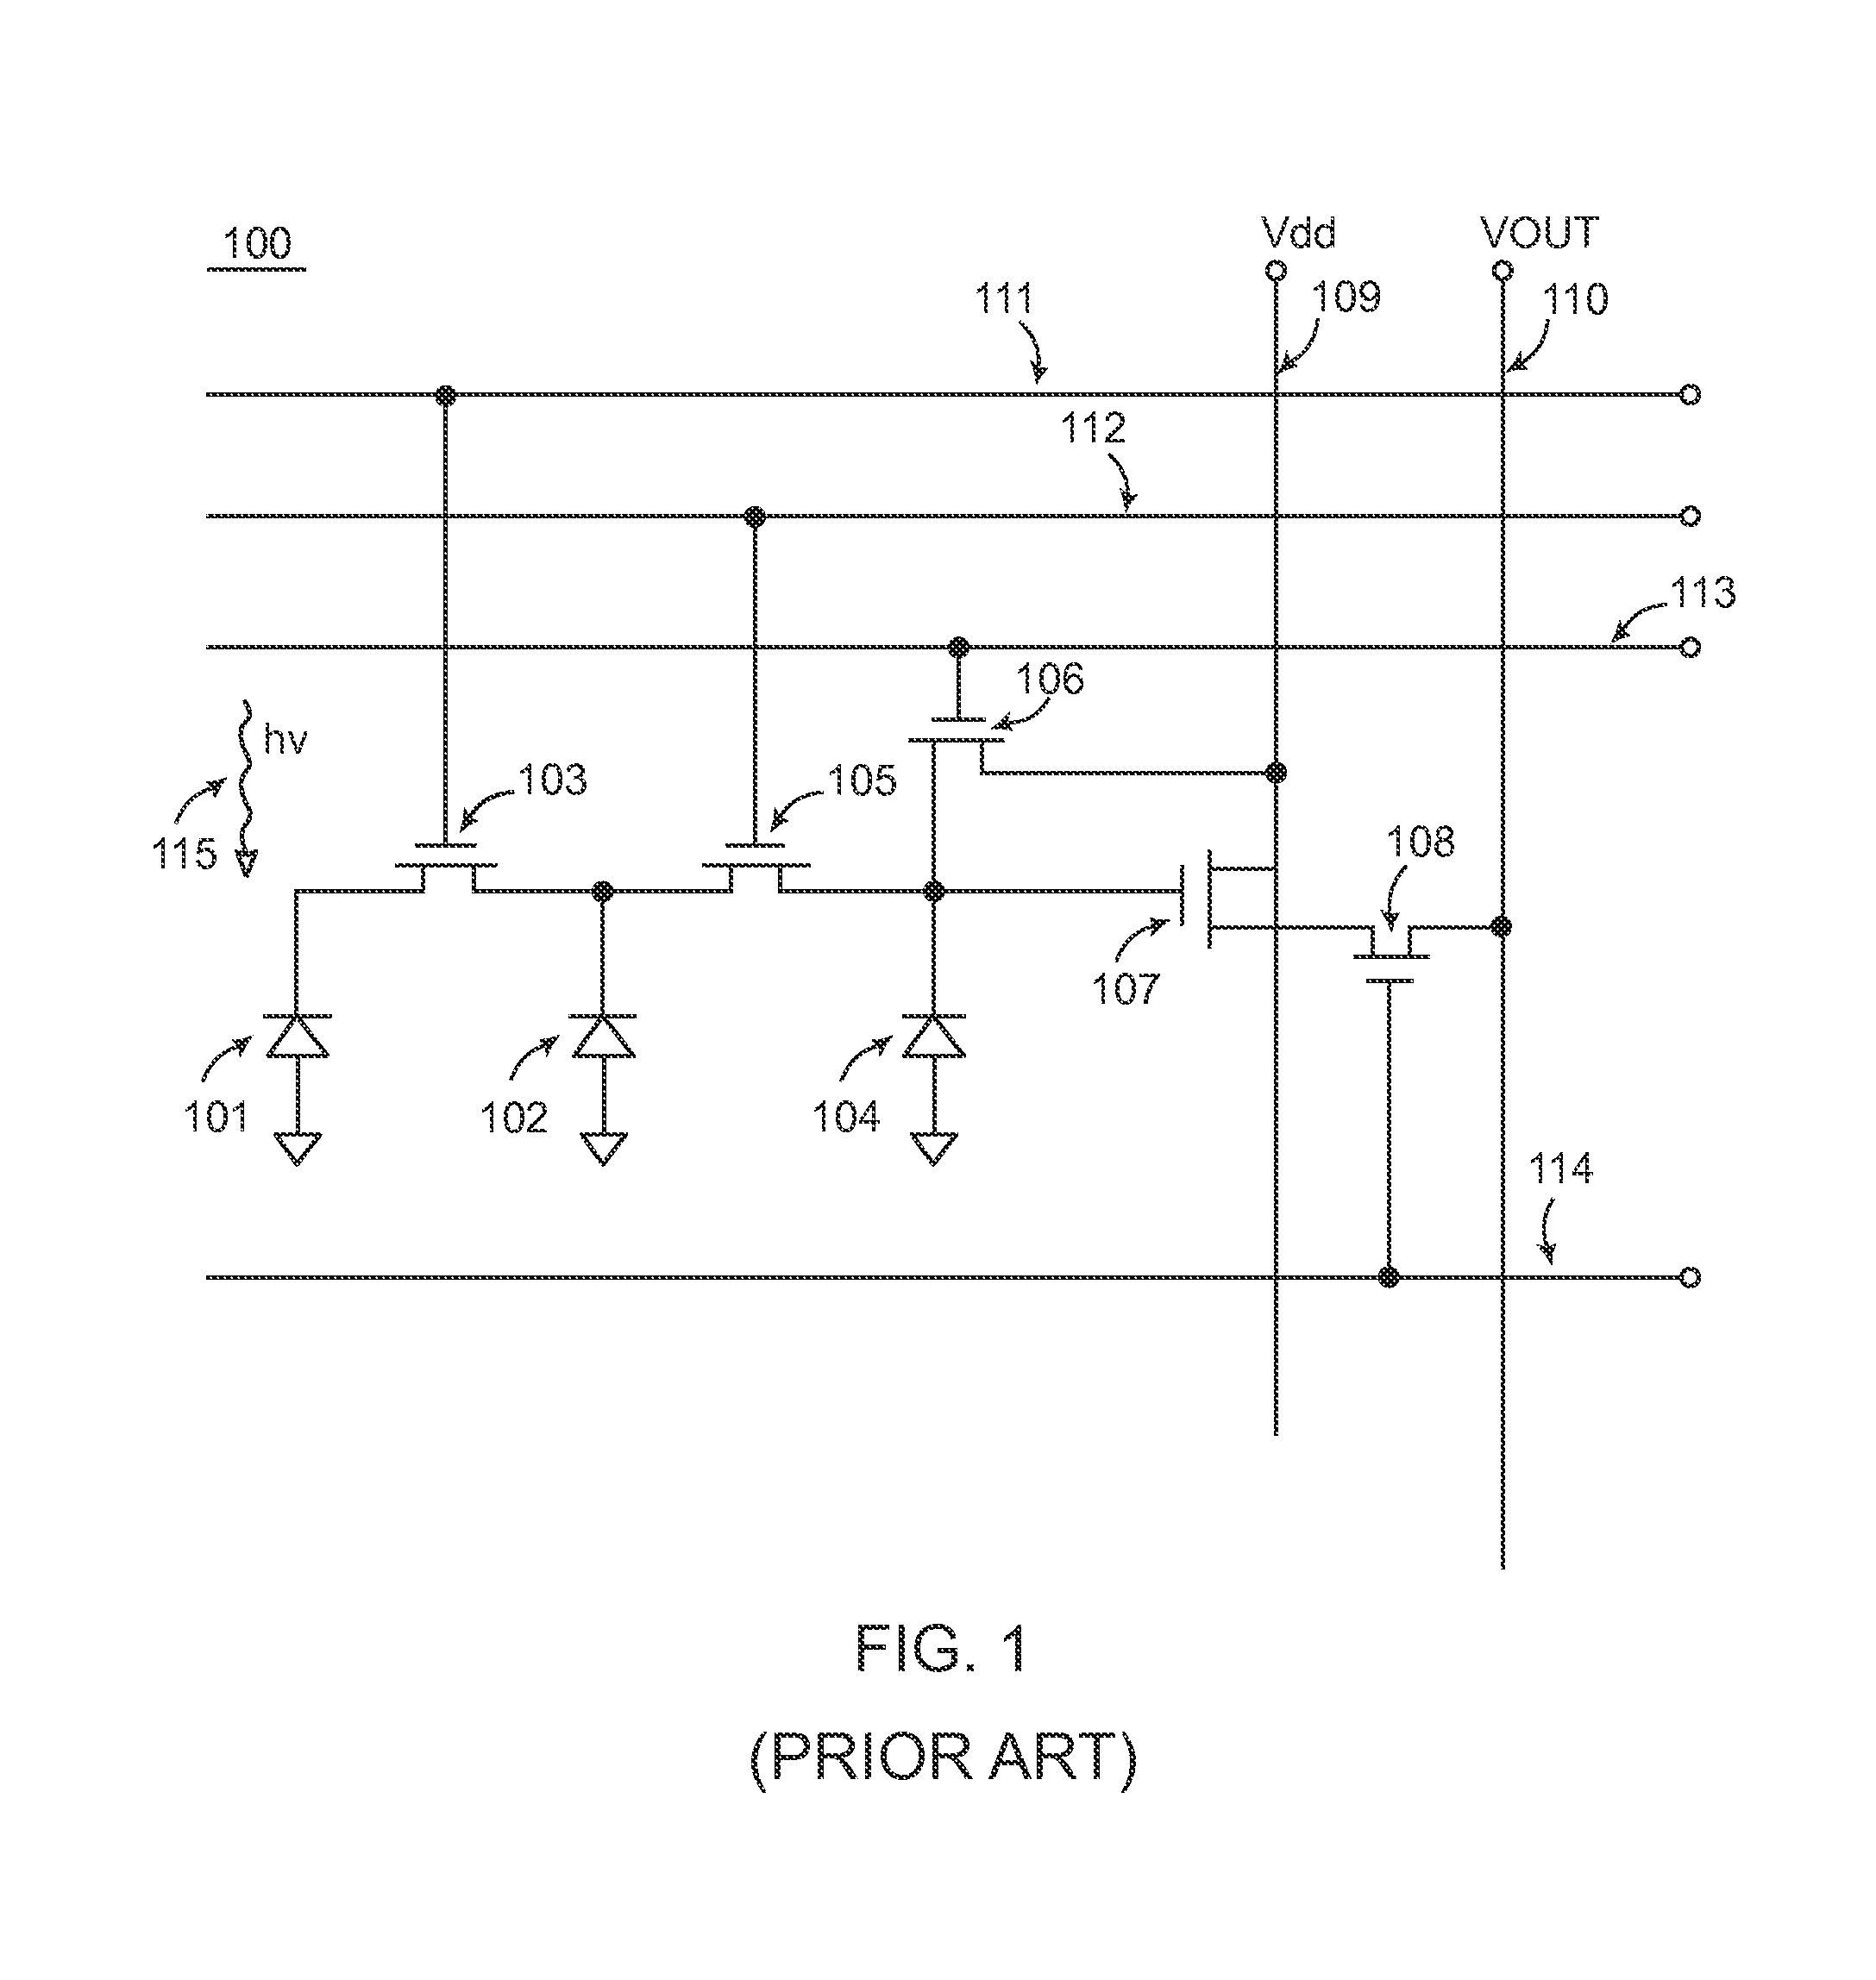 CMOS image sensor with global shutter, rolling shutter, and a variable conversion gain, having pixels employing several BCMD transistors coupled to a single photodiode and dual gate BCMD transistors for charge storage and sensing